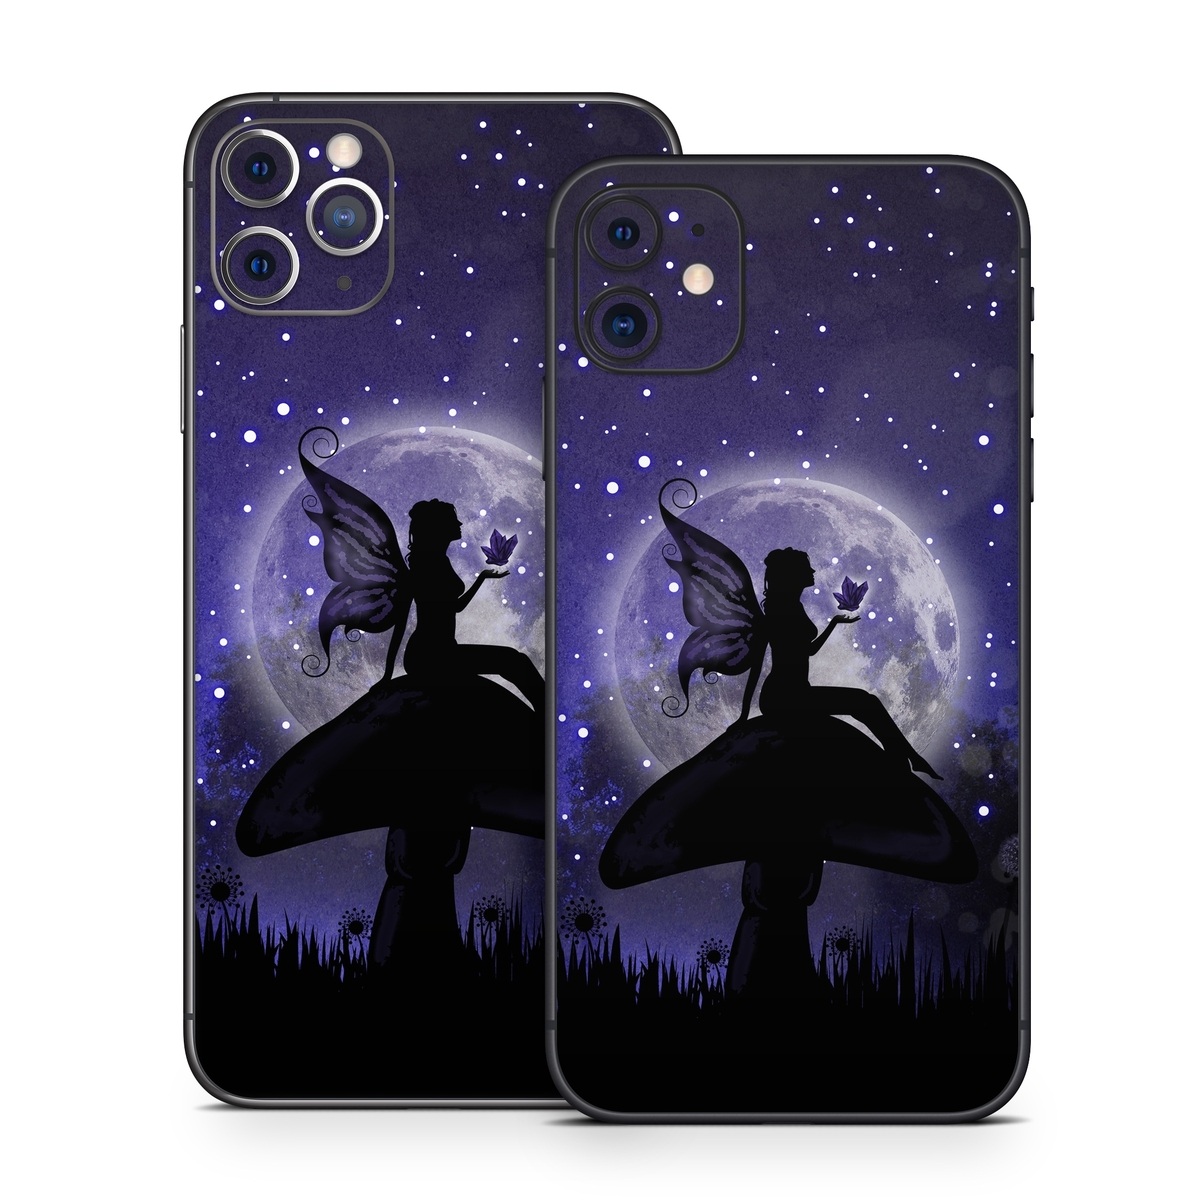 iPhone 11 Series Skin design of Purple, Sky, Moonlight, Cg artwork, Fictional character, Darkness, Night, Illustration, Space, Star, with black, blue, gray, purple colors